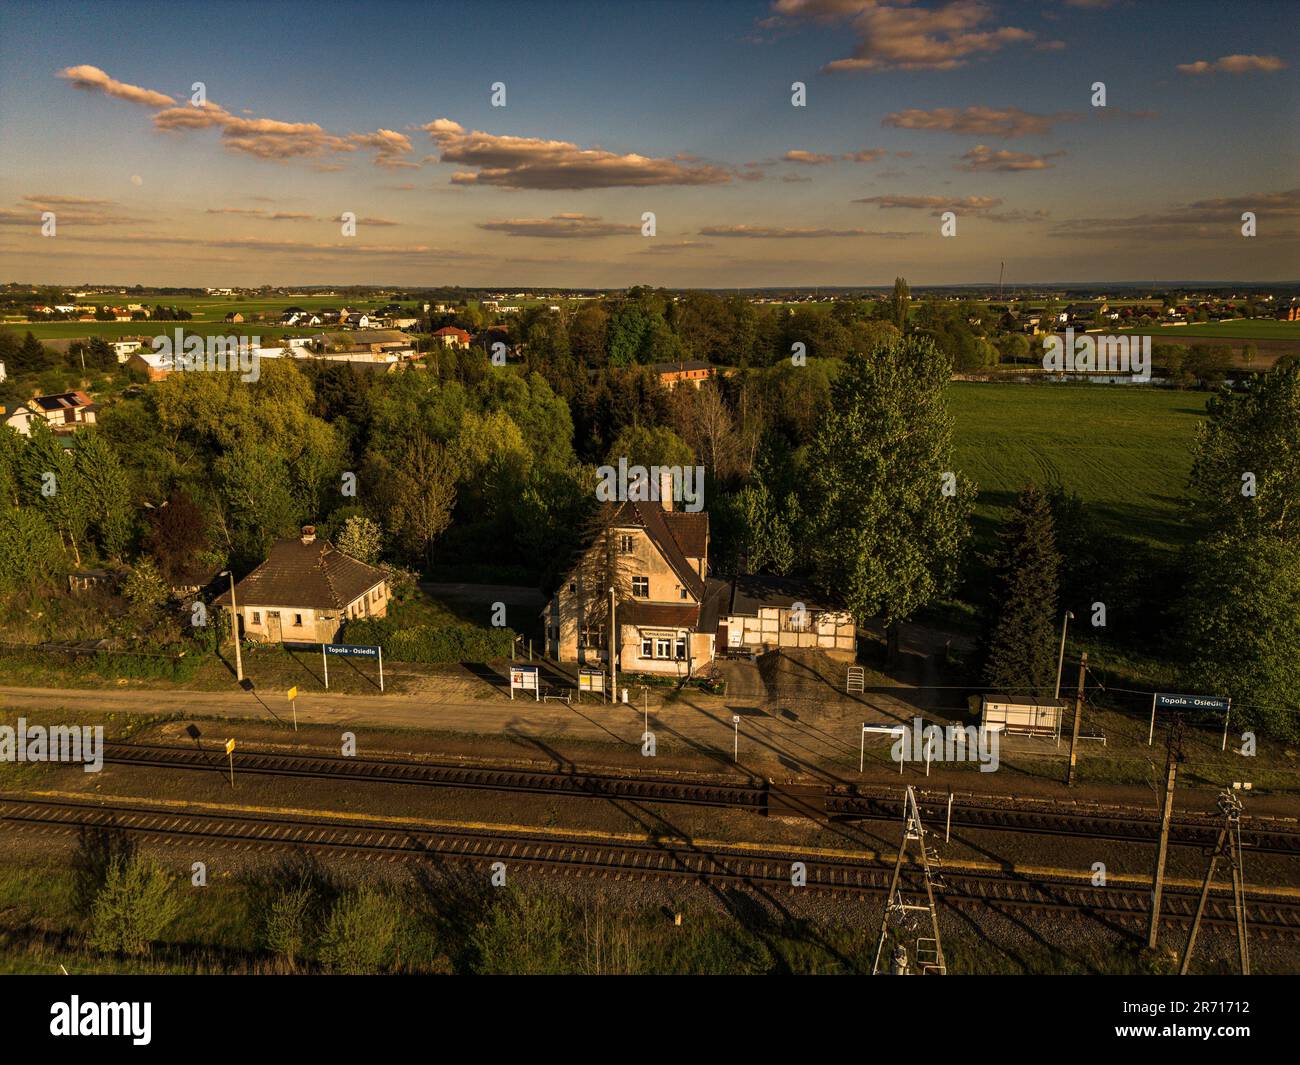 An aerial view of Topola-Osiedle surrounded by lush vegetation in Poland Stock Photo